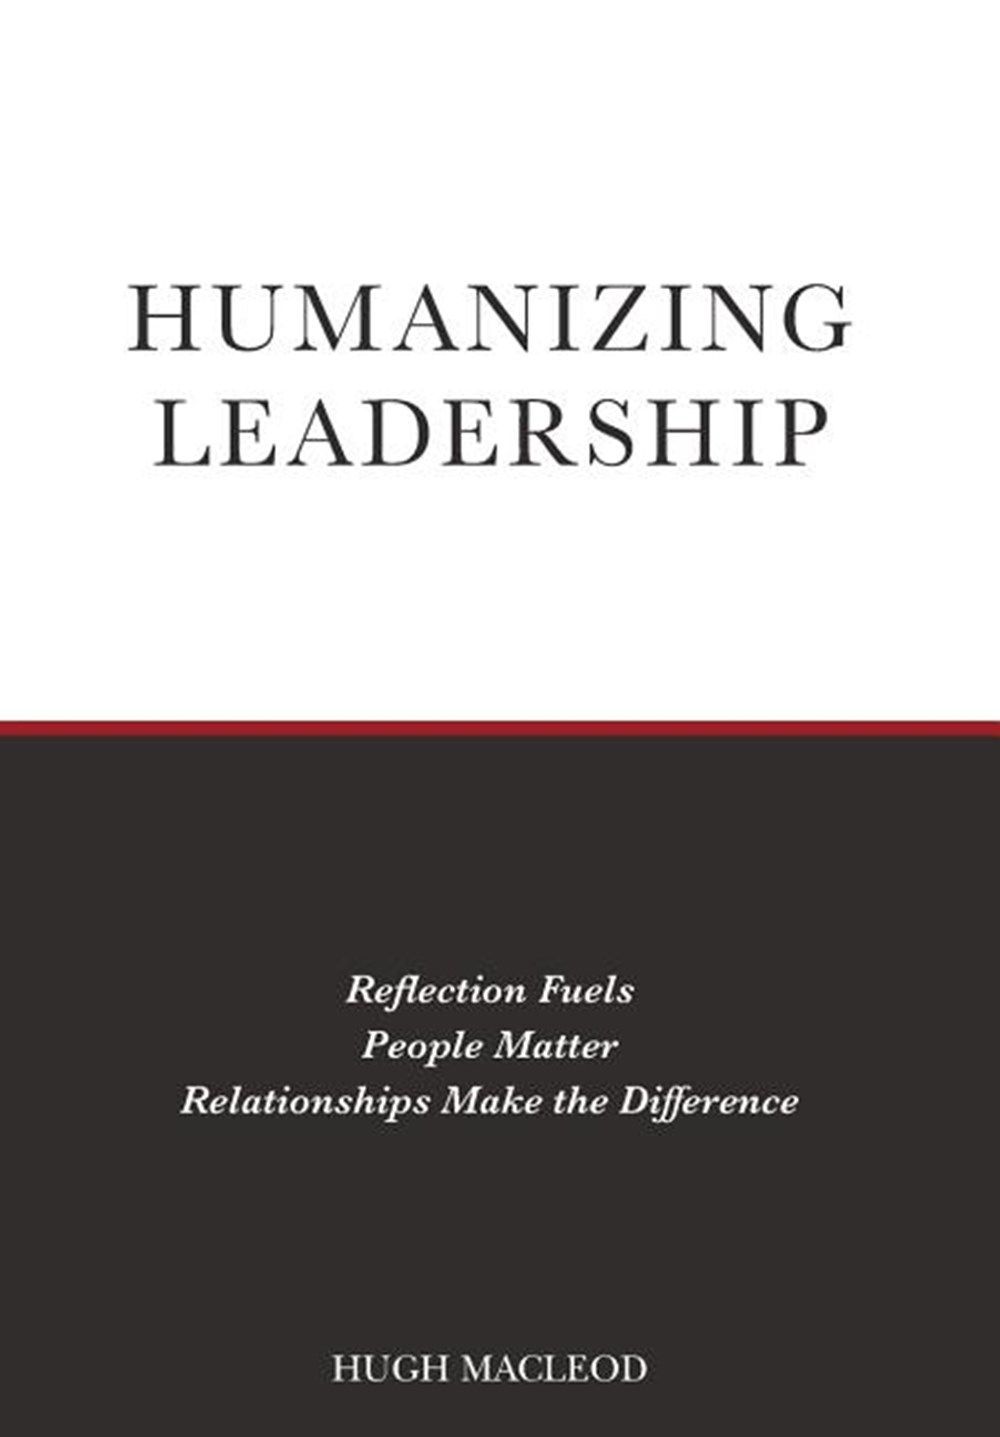 Humanizing Leadership: Reflection Fuels, People Matter, Relationships Make The Difference